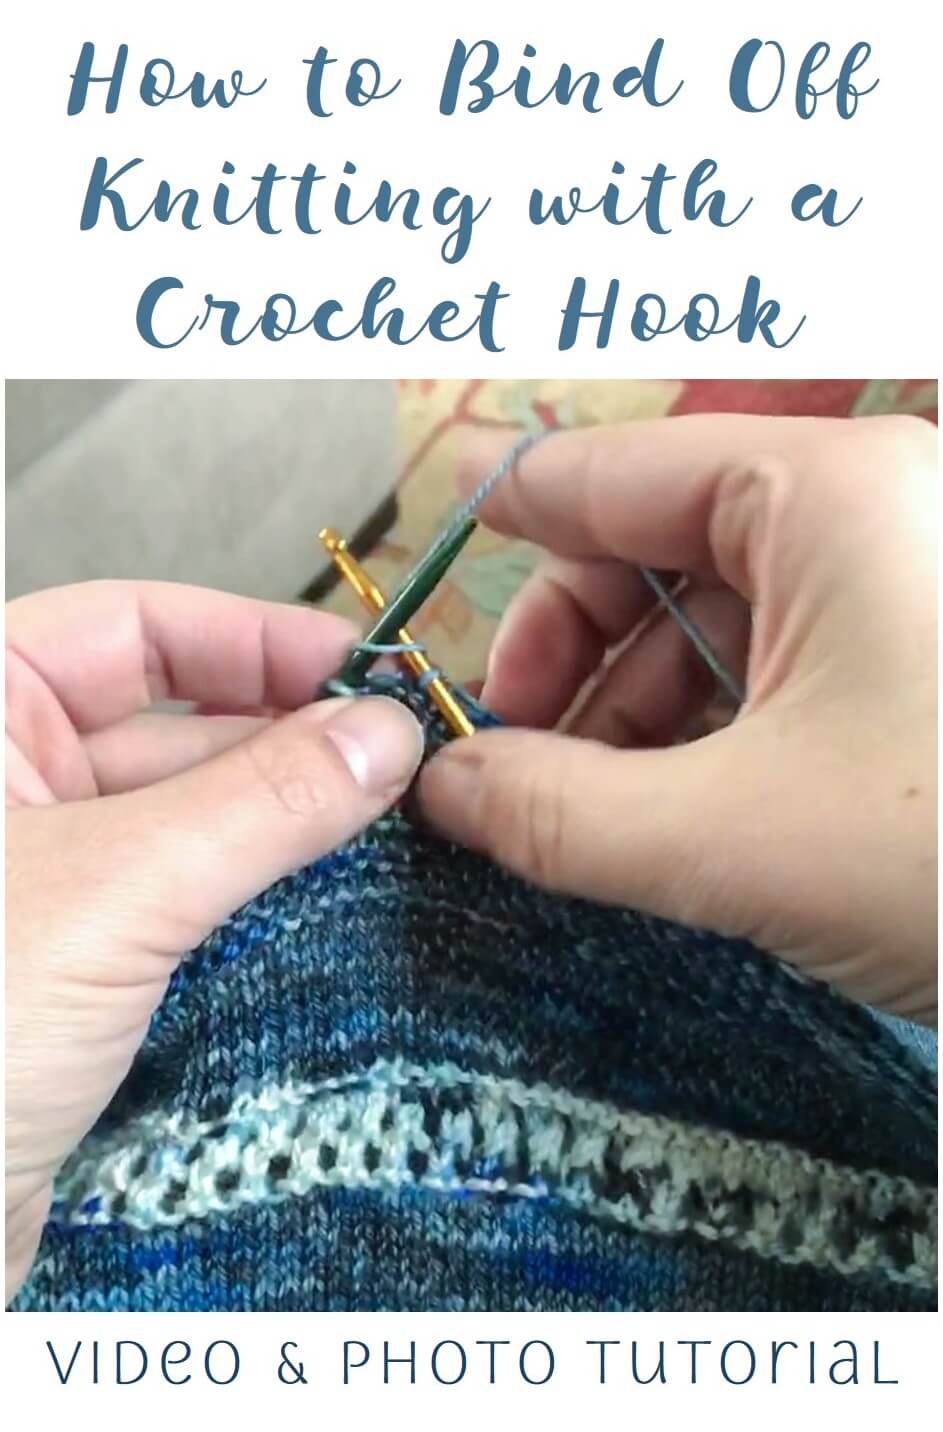 How to Bind Off Knitting with a Crochet Hook - Video and Photo Tutorial